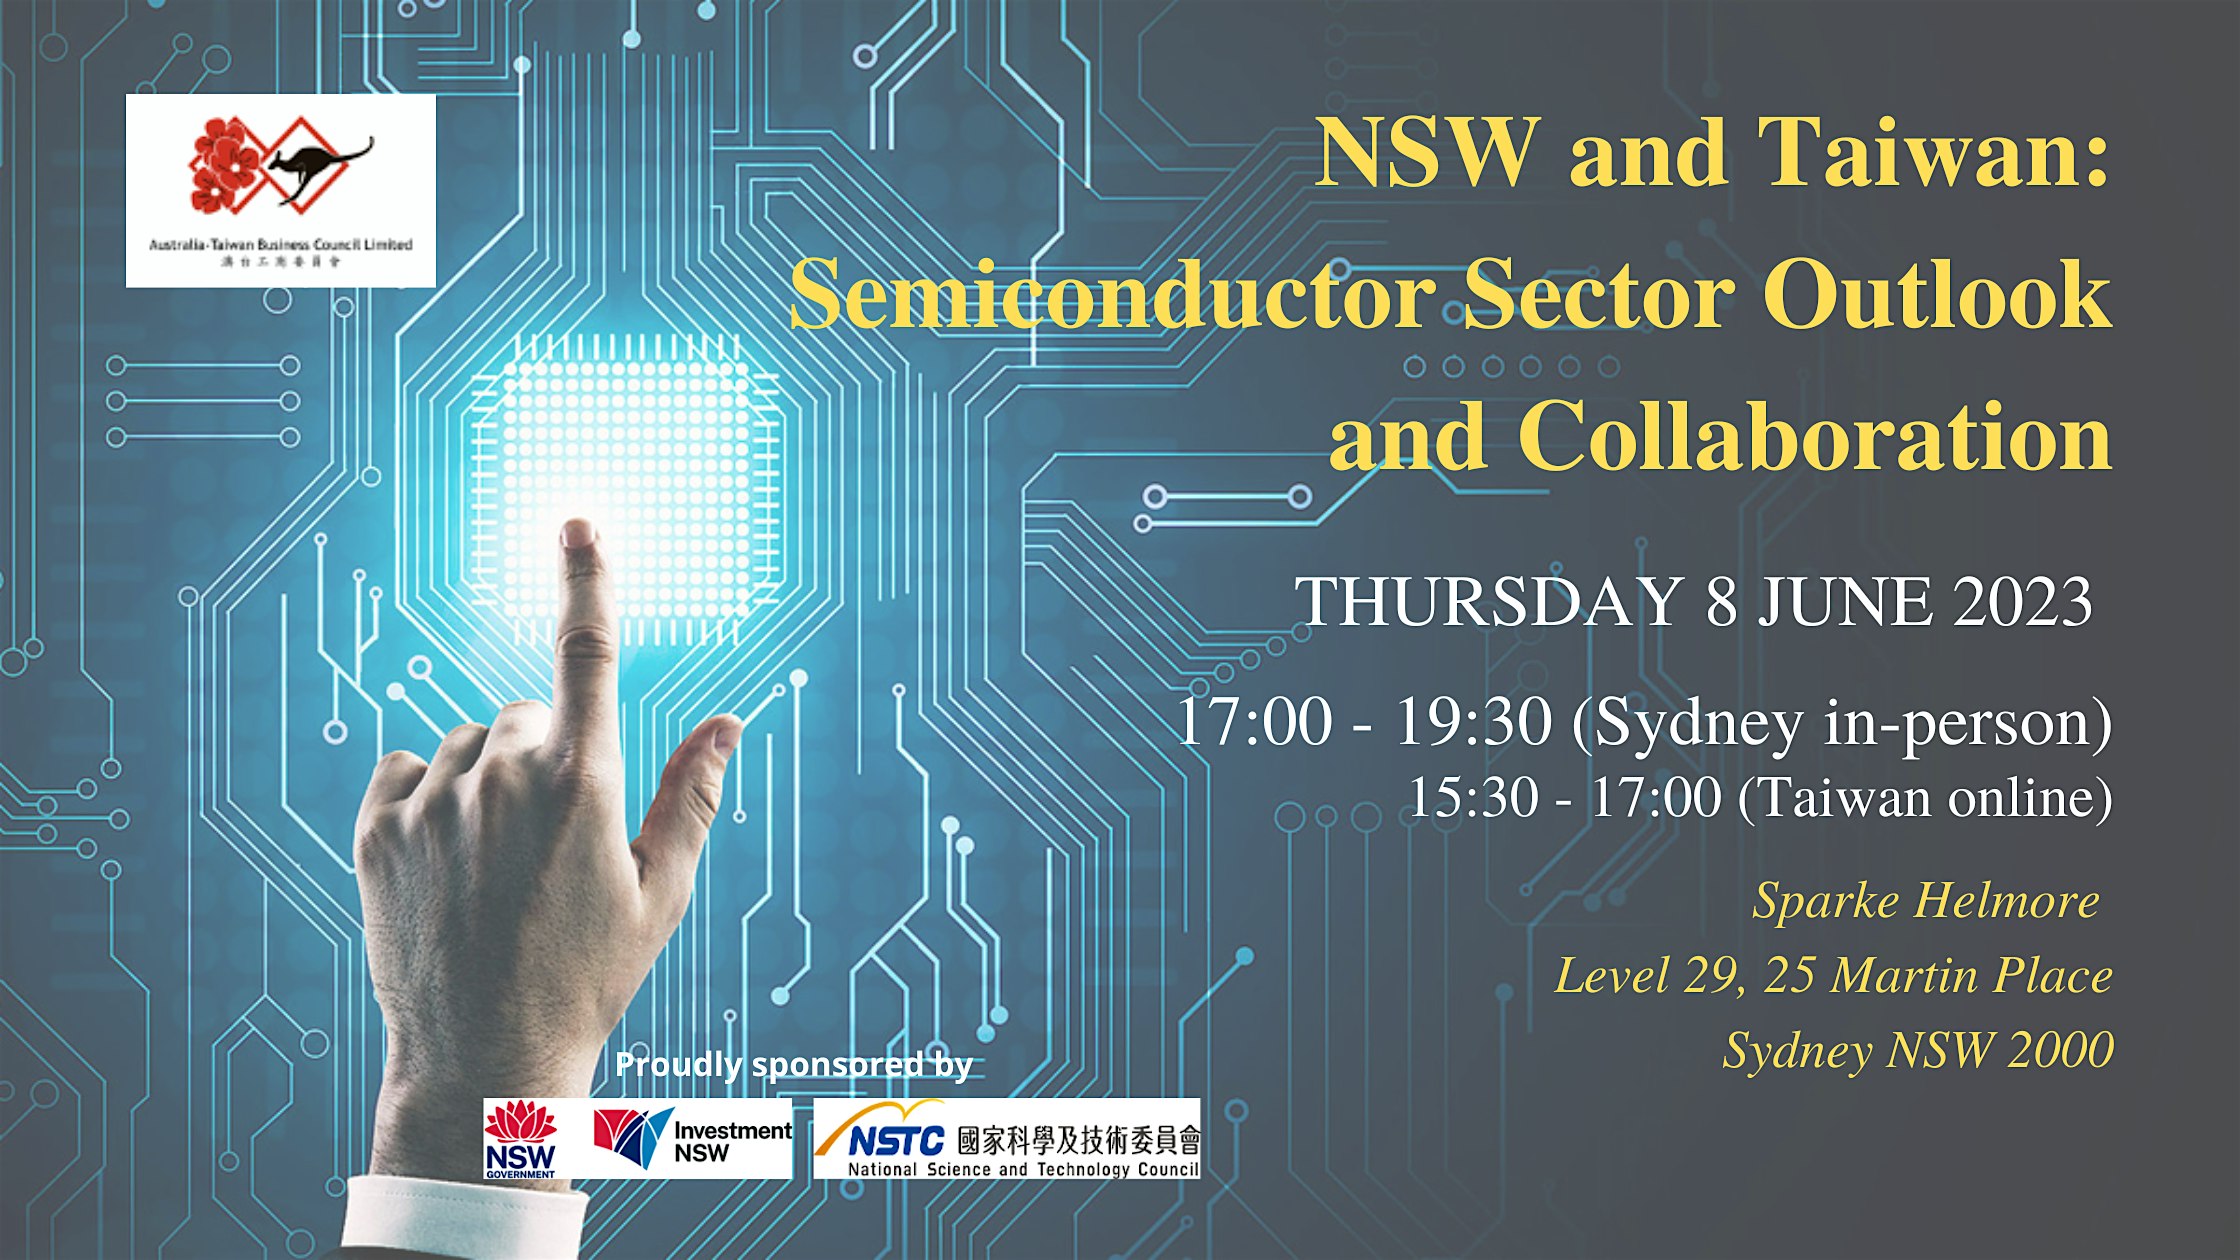 NSW and Taiwan: Semiconductor Sector Outlook and Collaboration